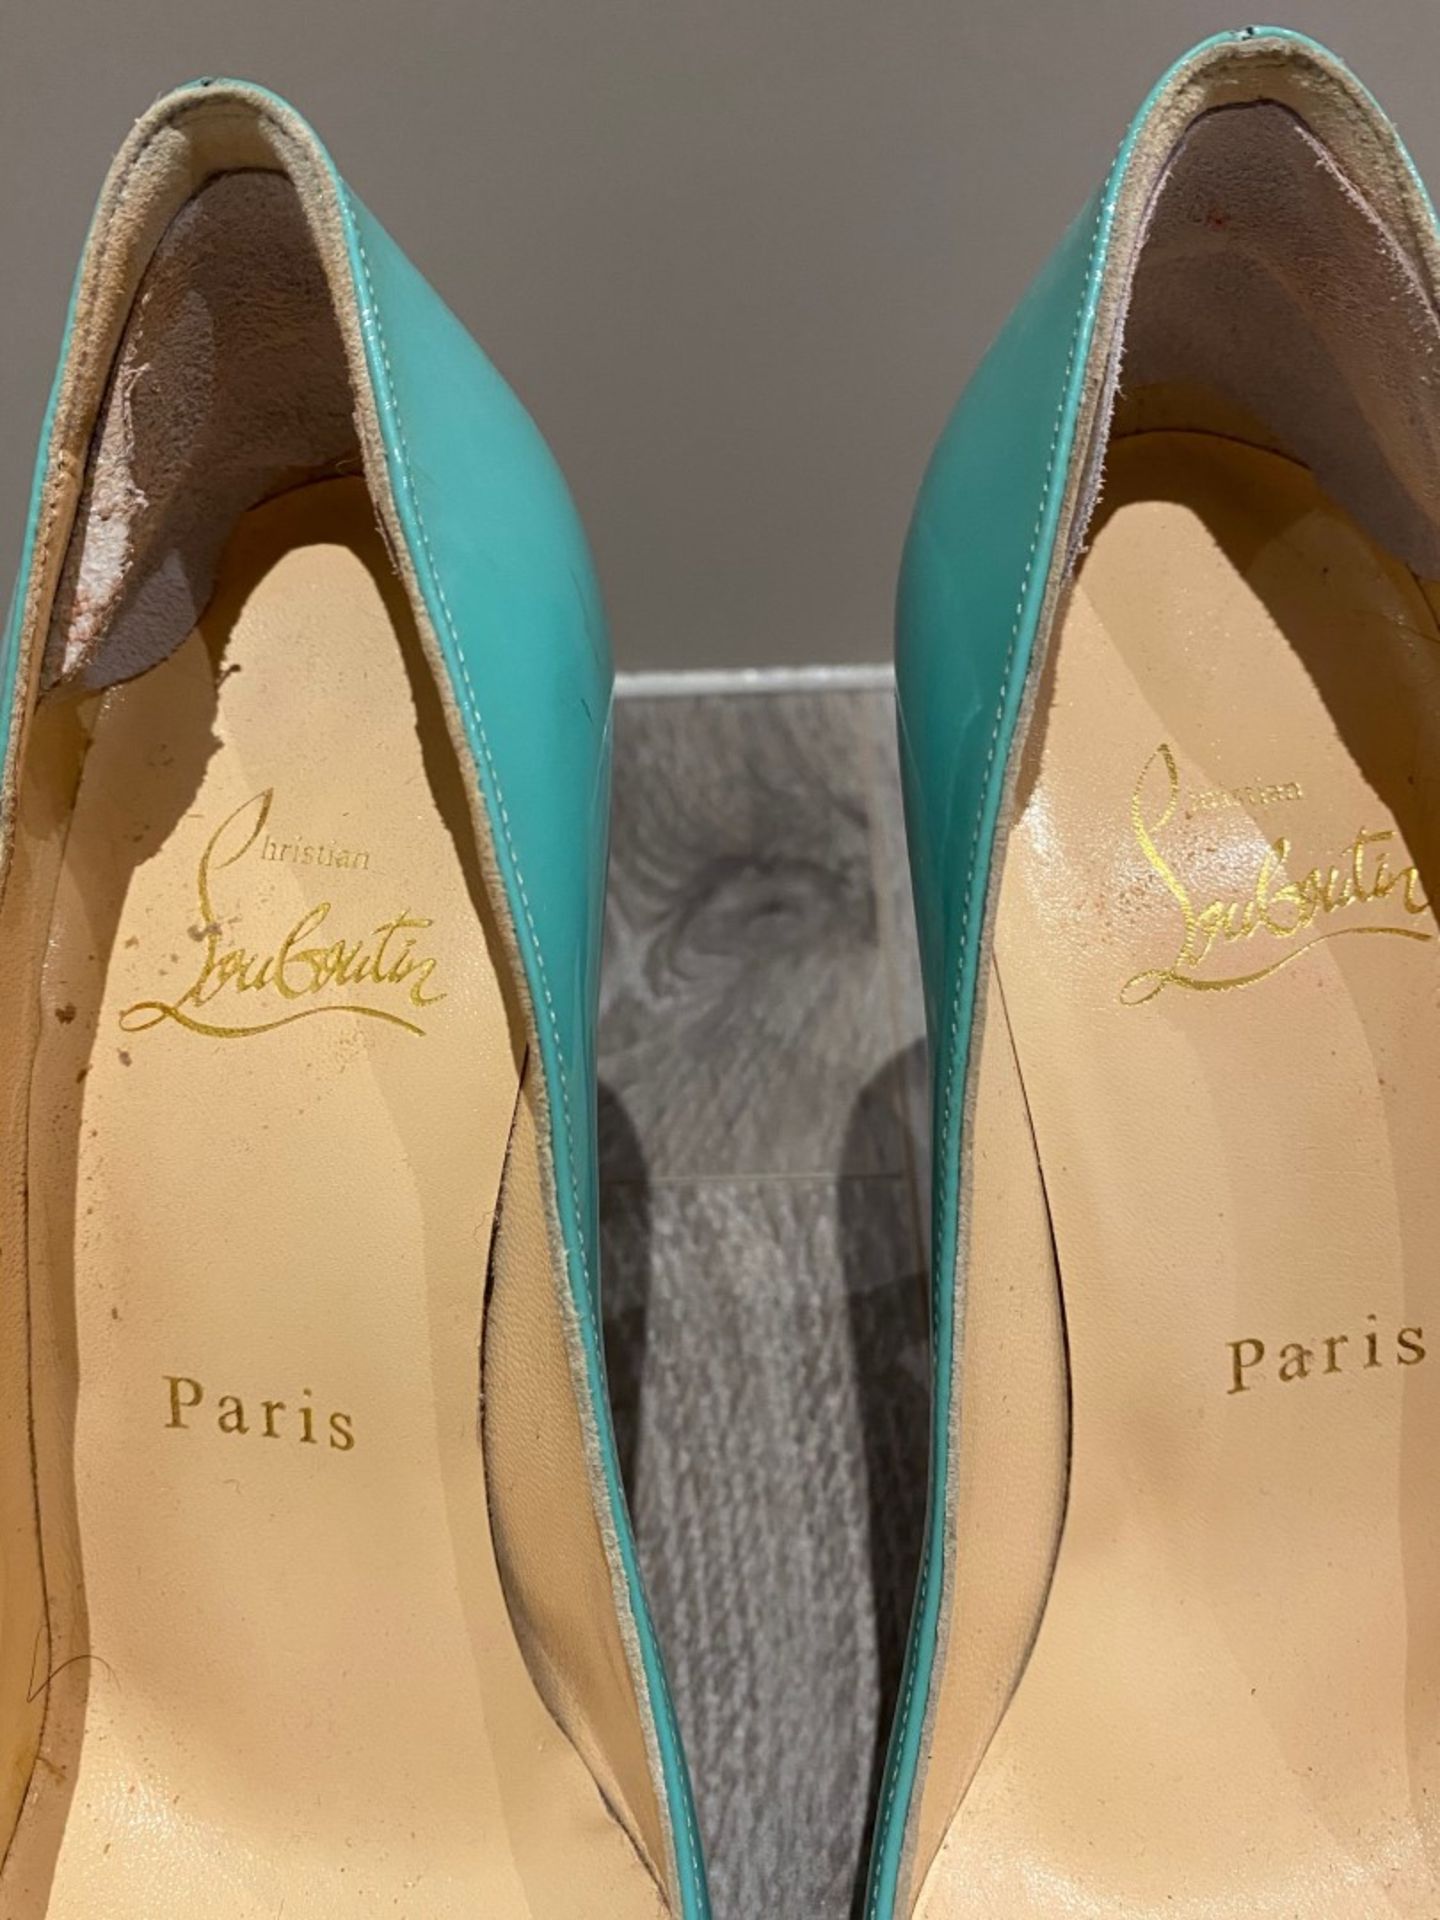 1 x Pair Of Genuine Christain Louboutin High Heel Shoes In Mint Green - Size: 36 - Preowned in Worn - Image 3 of 4